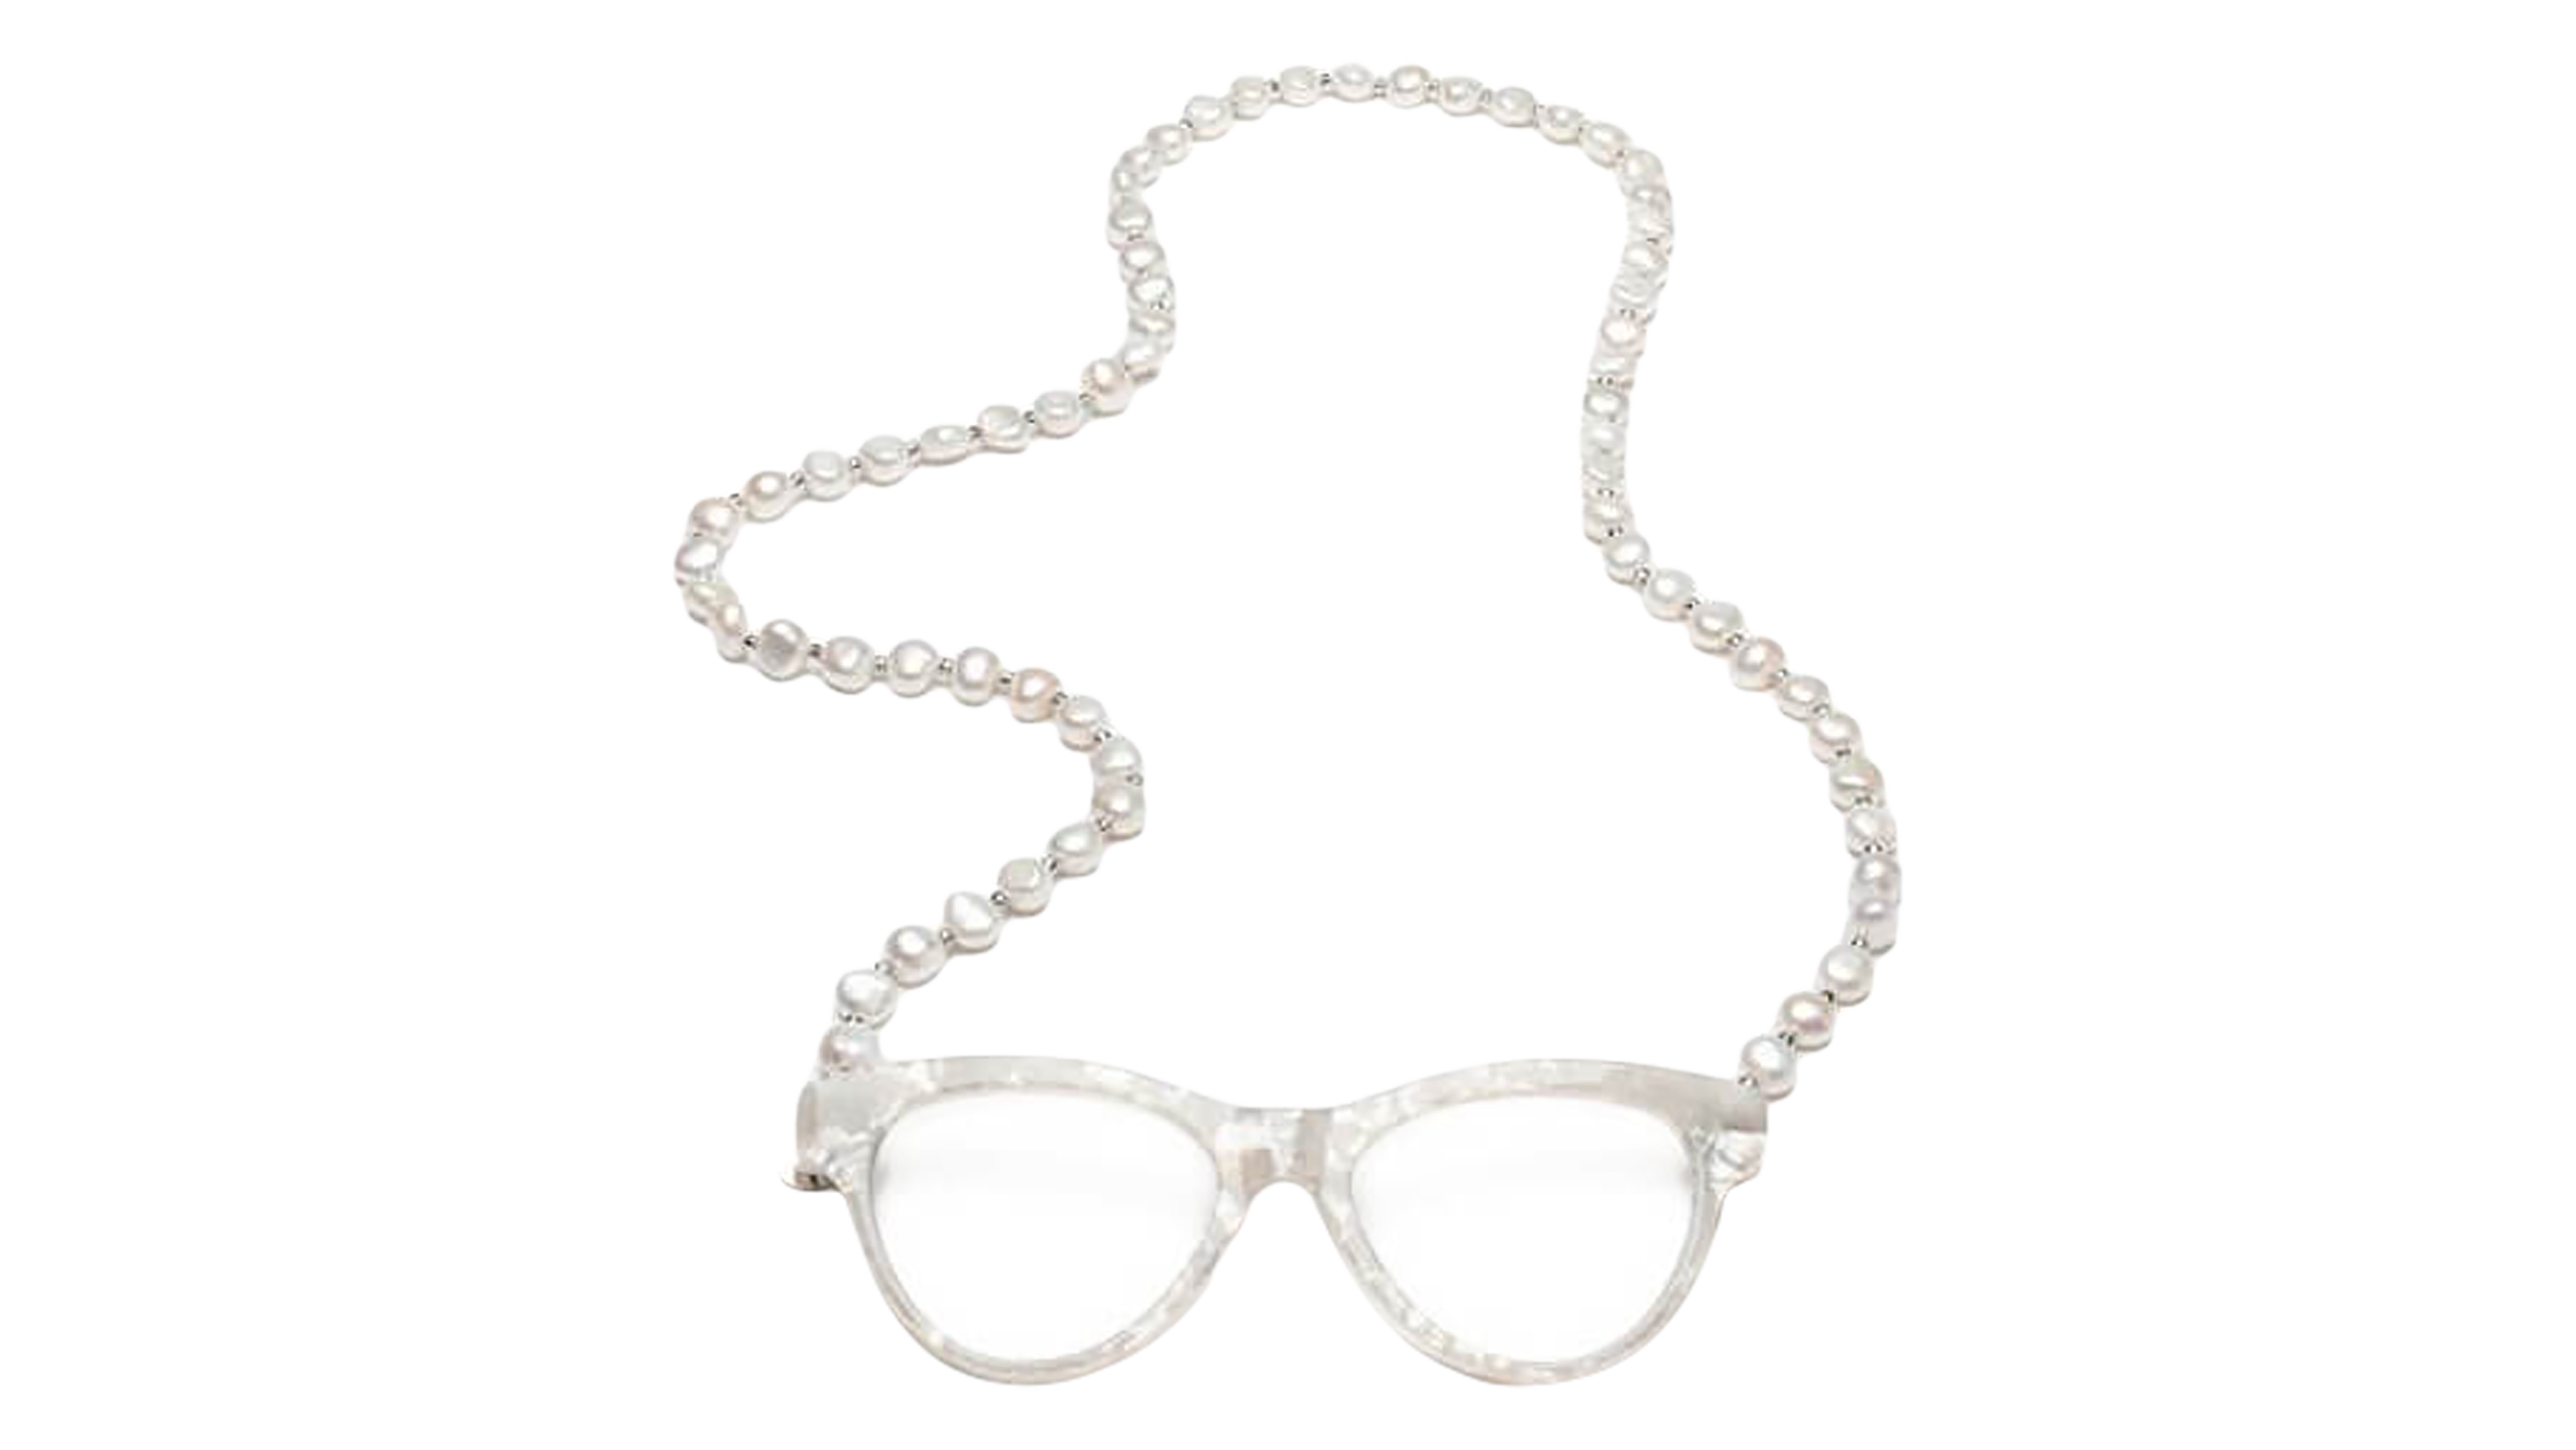 Front CotiVision Elements Pearls - Classic White (+1.00) Necklace Reading Glasses White +1.00